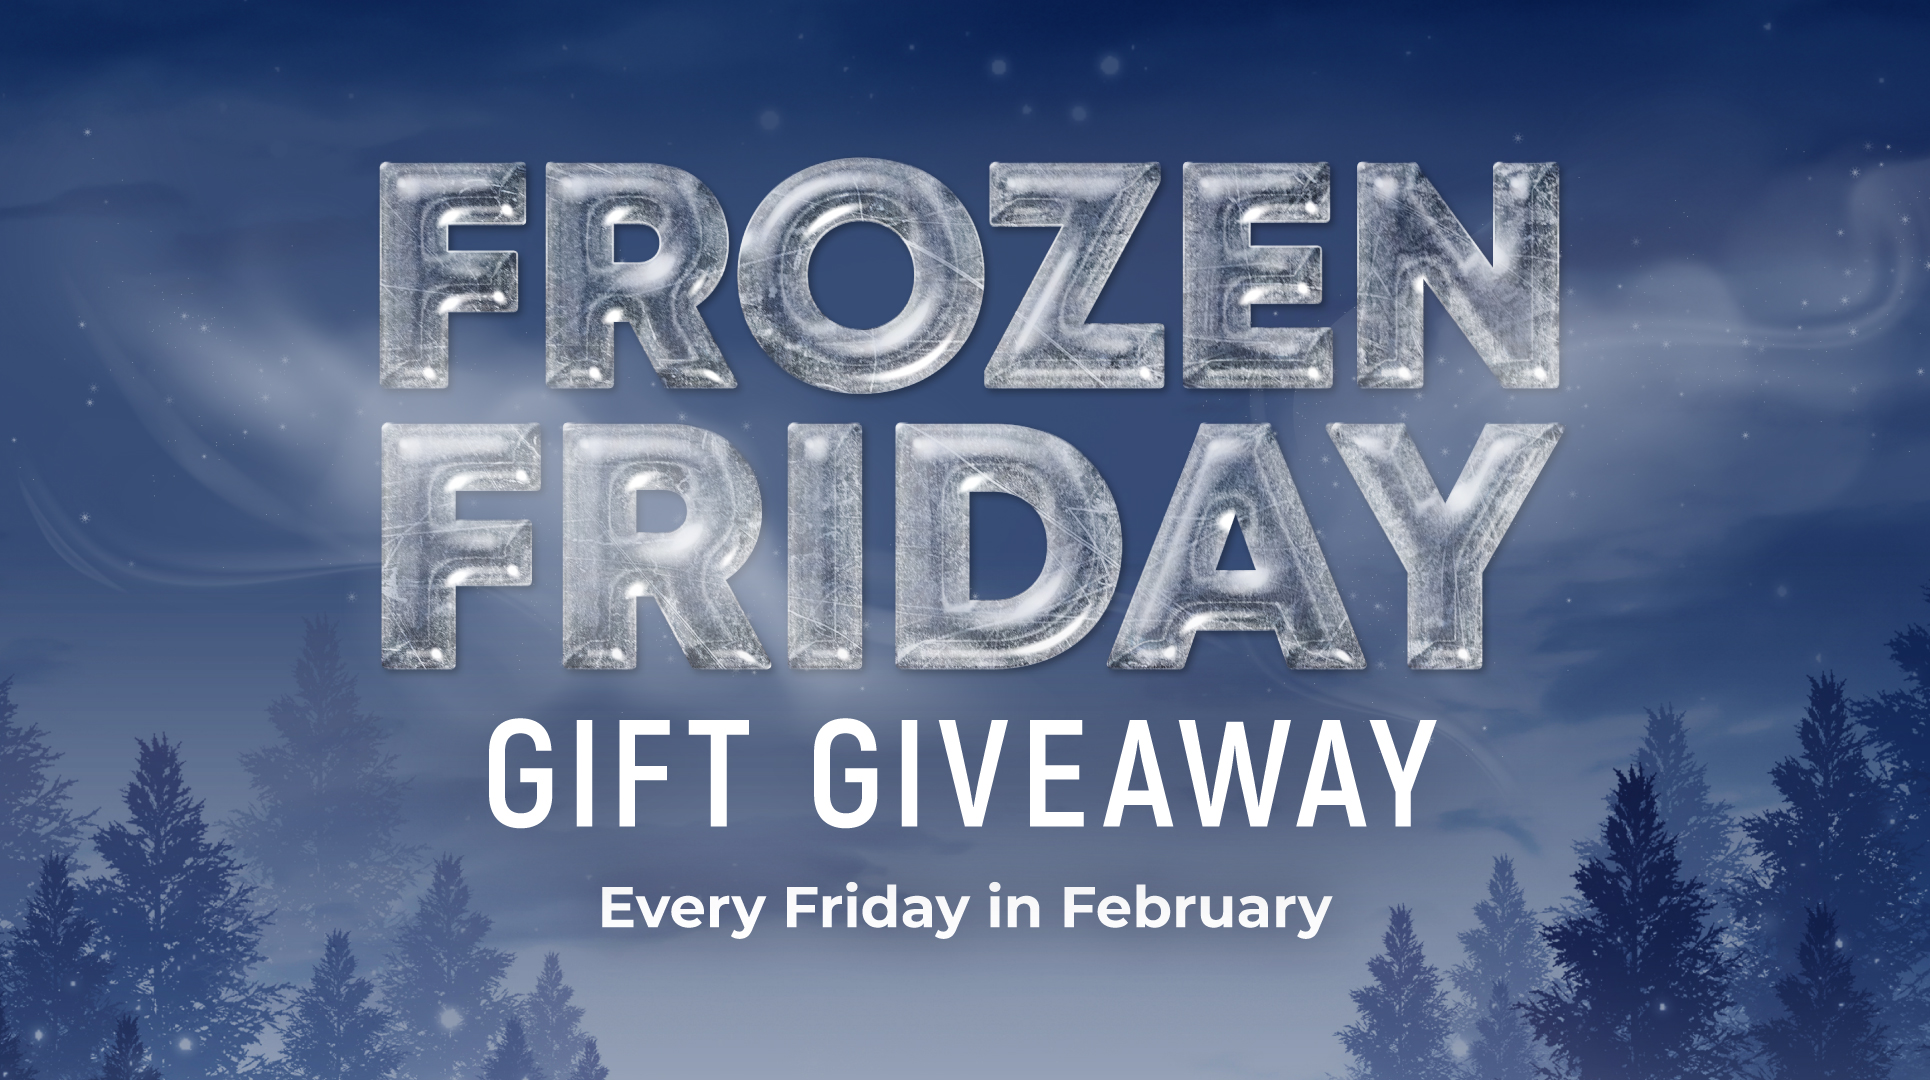 Frozen Friday Gift Giveaway Every Friday in February Beat the CHILL wiht WINTERFUL gear! 50 Tier Credits To Earn Feb 3: Sweatshirt Feb 10: Scarf Feb 17: Blanket Feb 24: Hat